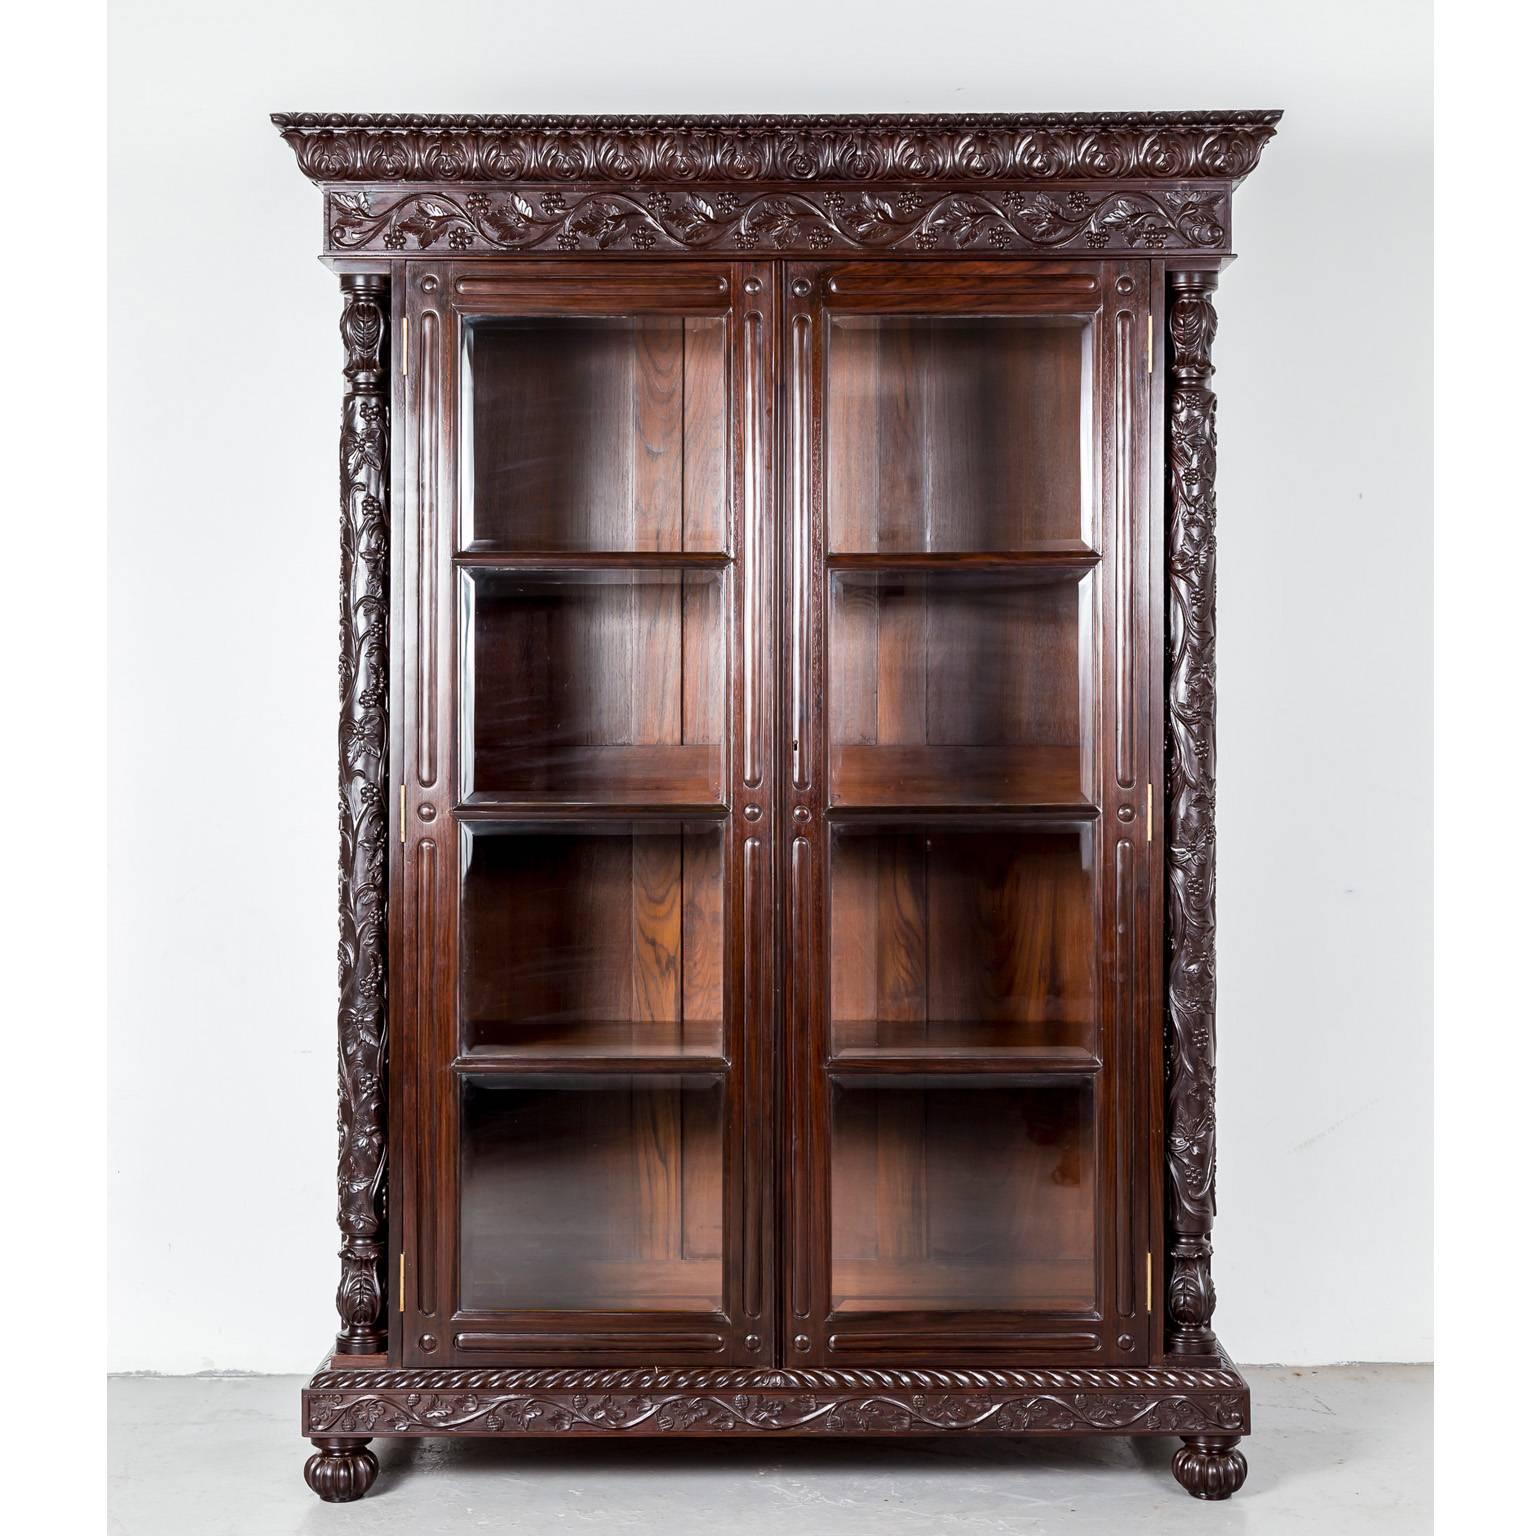 A magnificent British Colonial glass front cabinet in rosewood with a deep cornice consisting of a wide band of floral carving and egg and dart carving on the edge. The frieze is relief carved in an intertwining floral design. 

The cabinet has